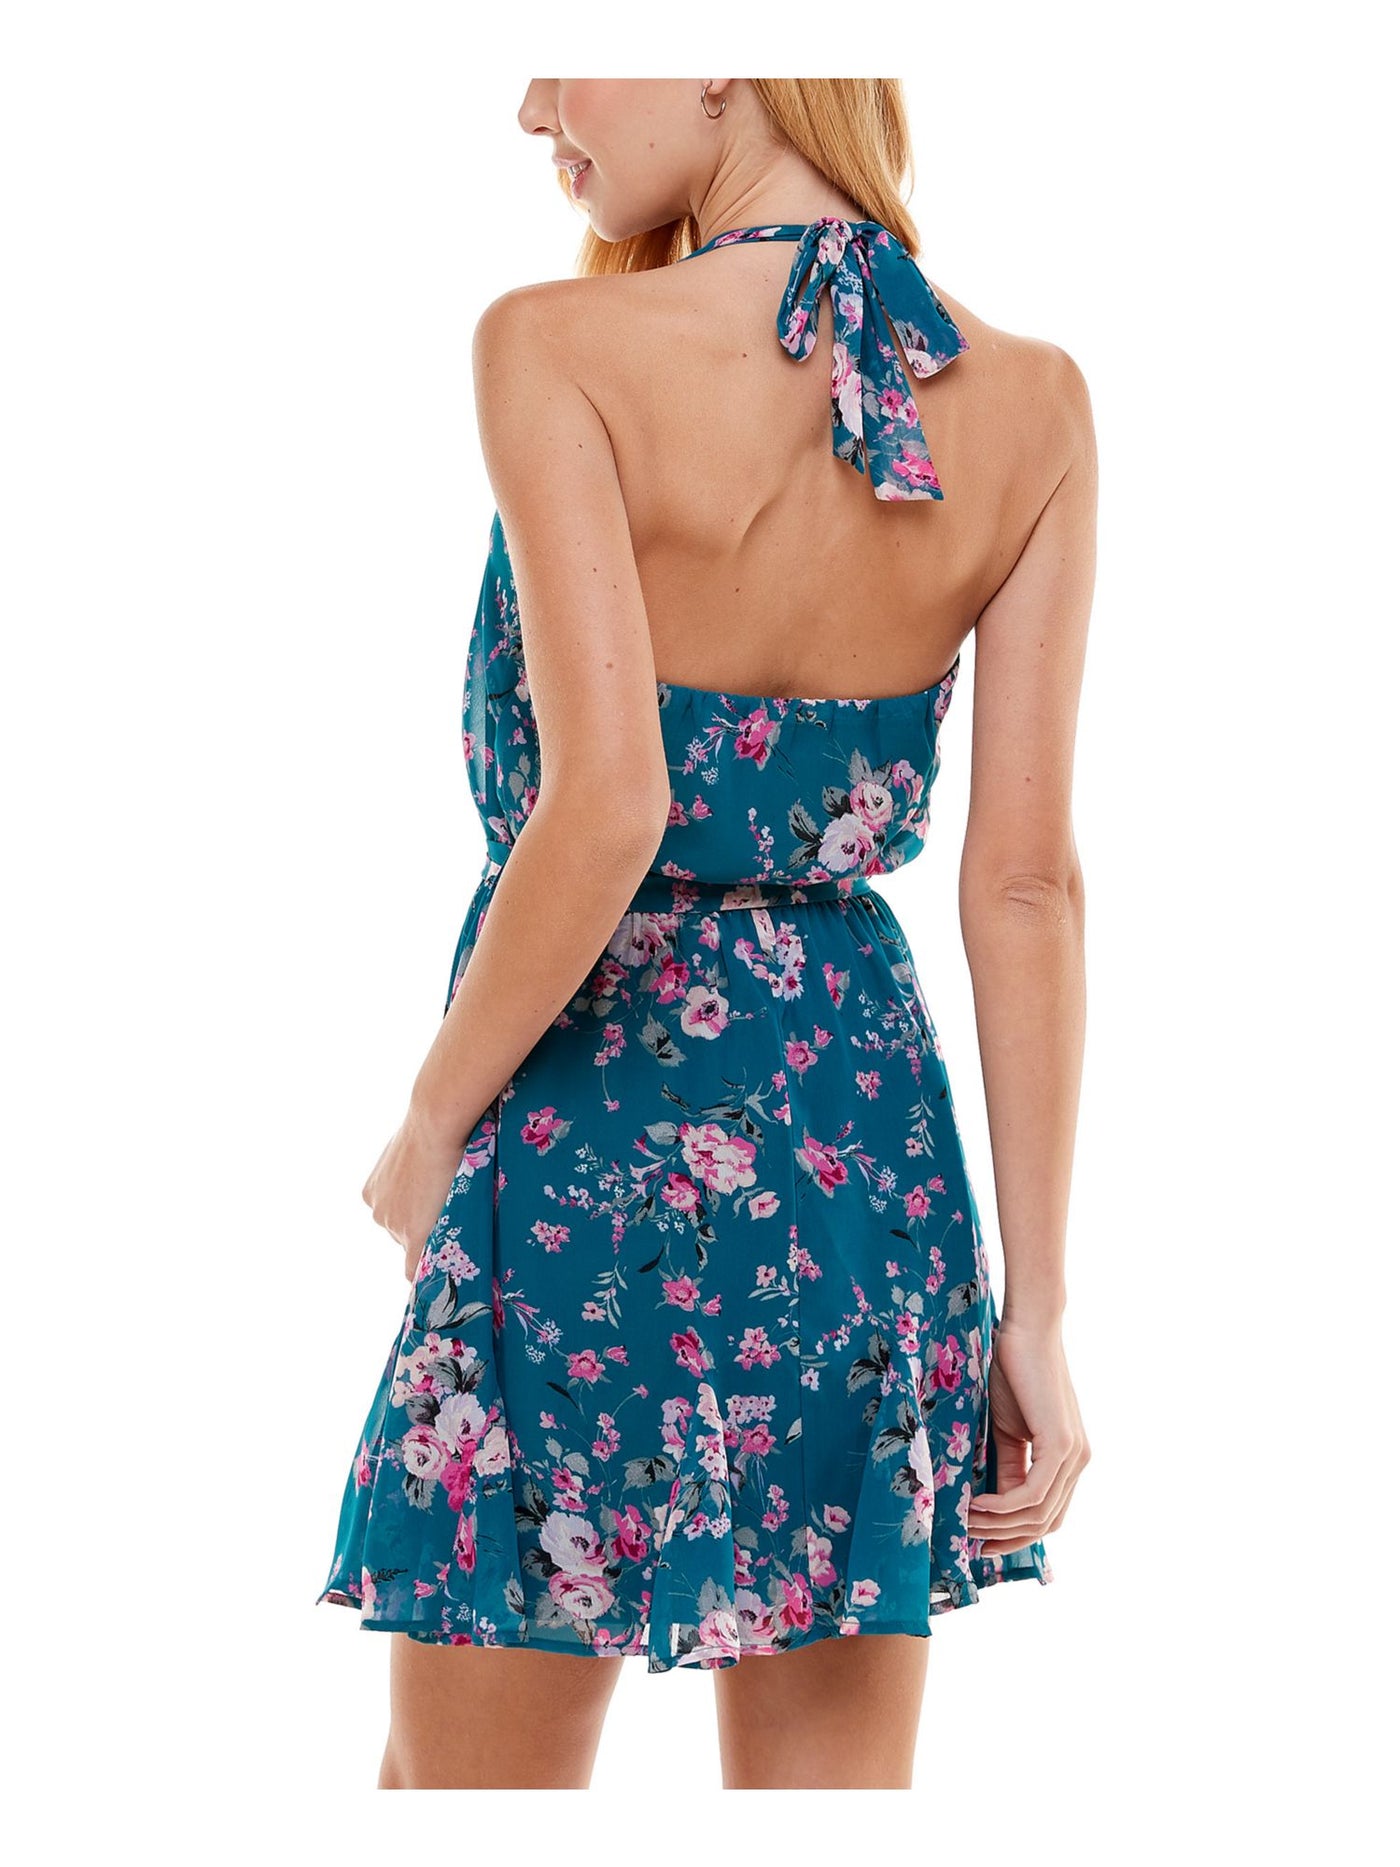 CITY STUDIO Womens Teal Tie Halter Floral Sleeveless Scoop Neck Mini Party Fit + Flare Dress Juniors S